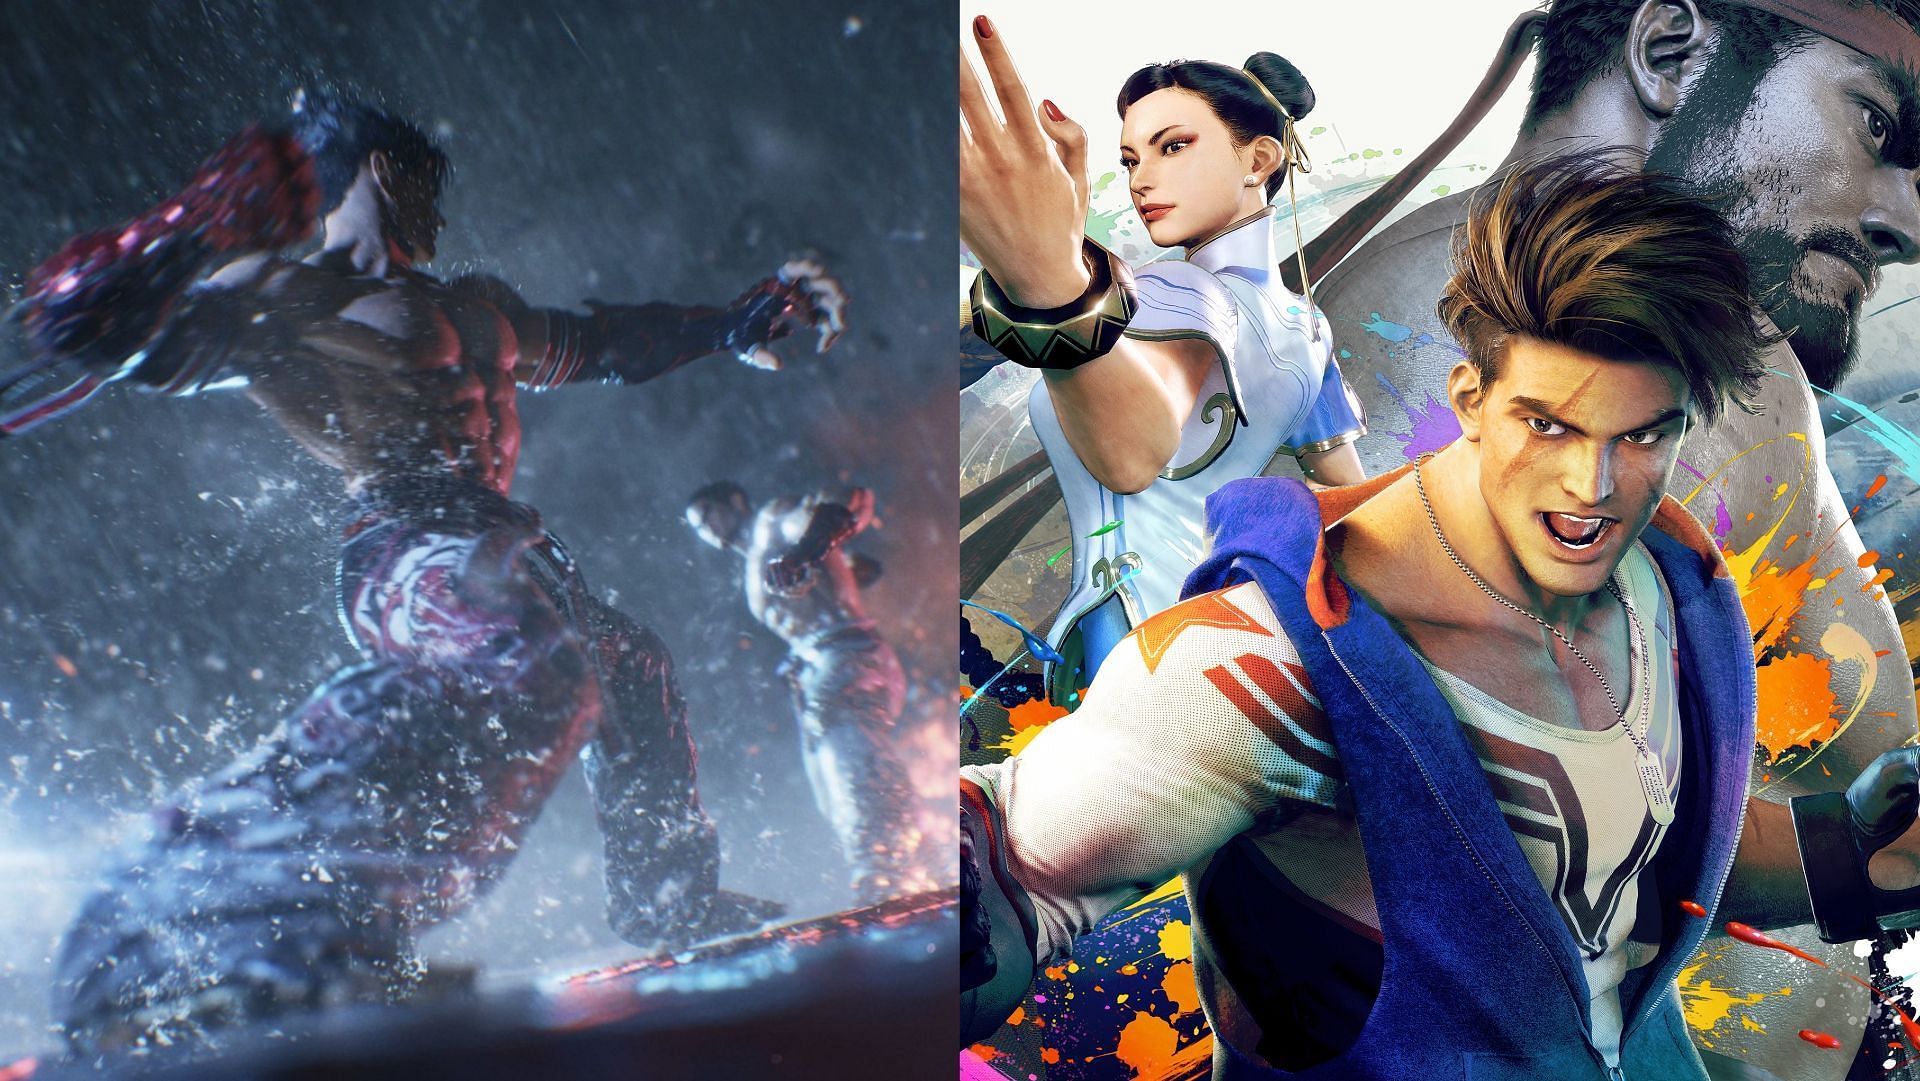 2023 seems to be a big year for Fighting games (Images via Bandai Namco, Capcom)